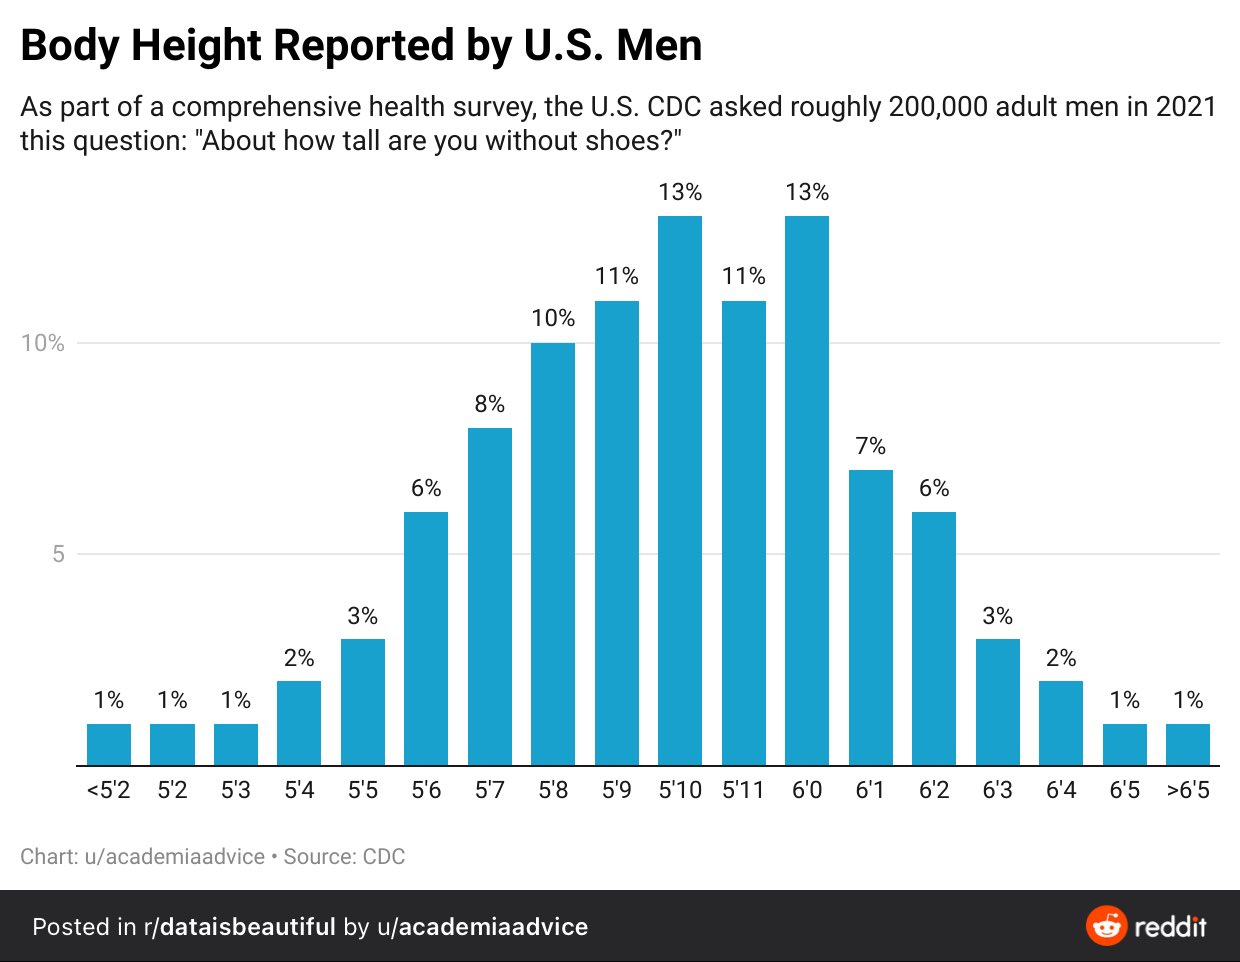 Rob Henderson on X: In the U.S., only 14.5 percent of men are 6 feet or  taller, but 33 percent of U.S. men self-report that they are at least 6 feet  tall. / X